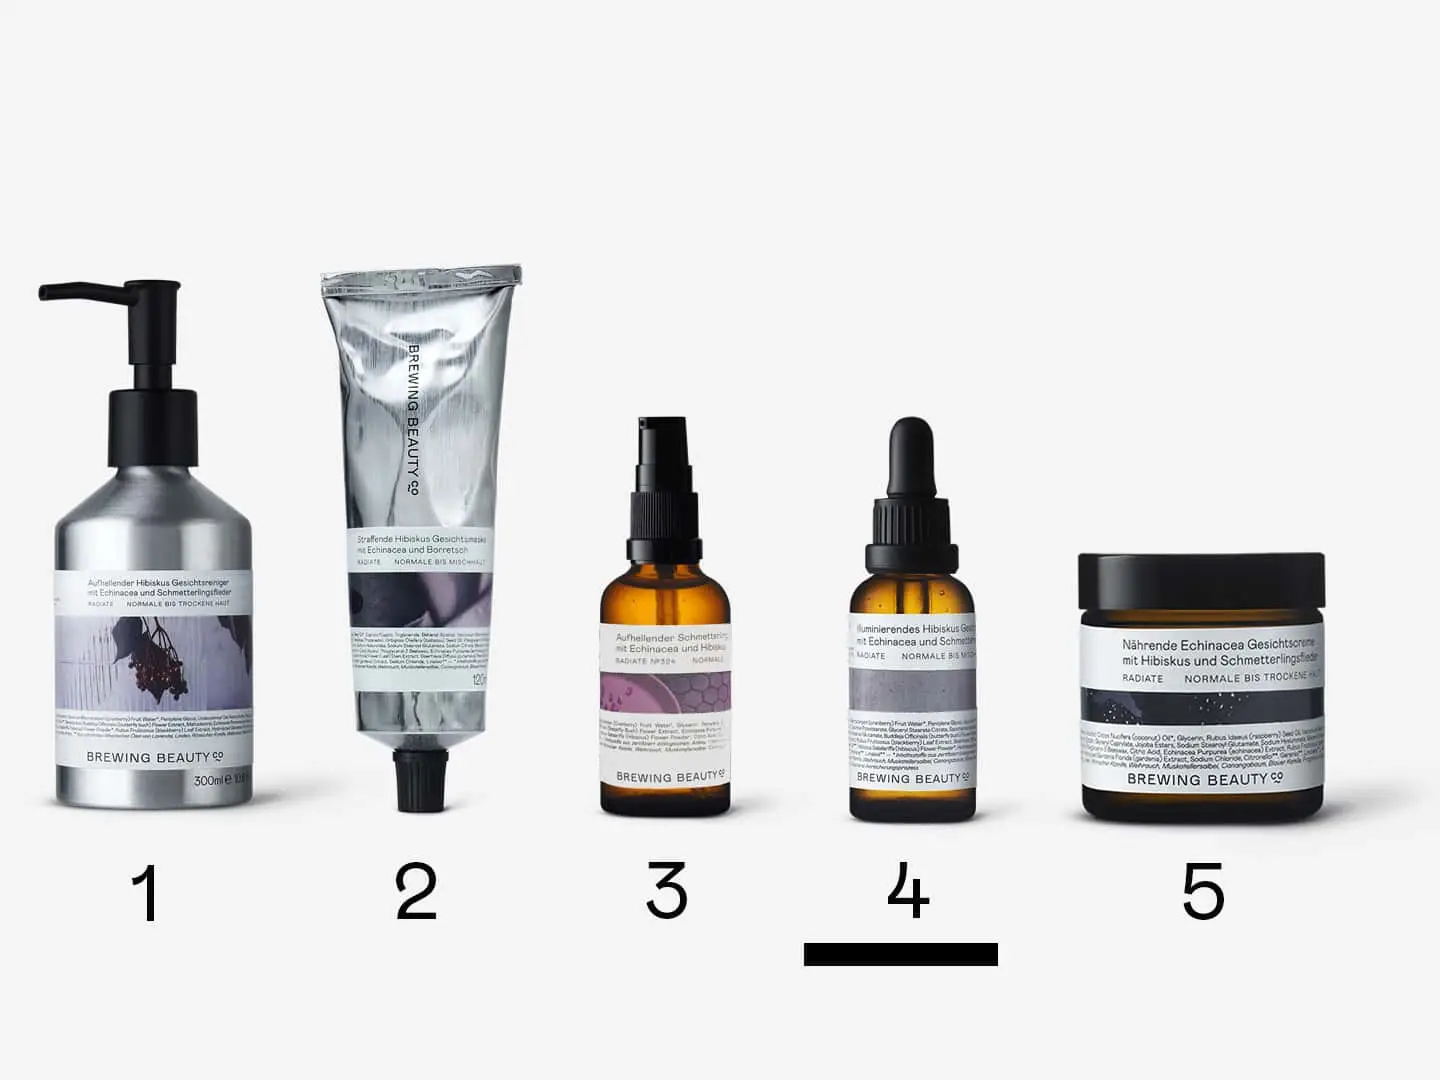 A lineup of Brewing Beauty products representing Routine No.31 